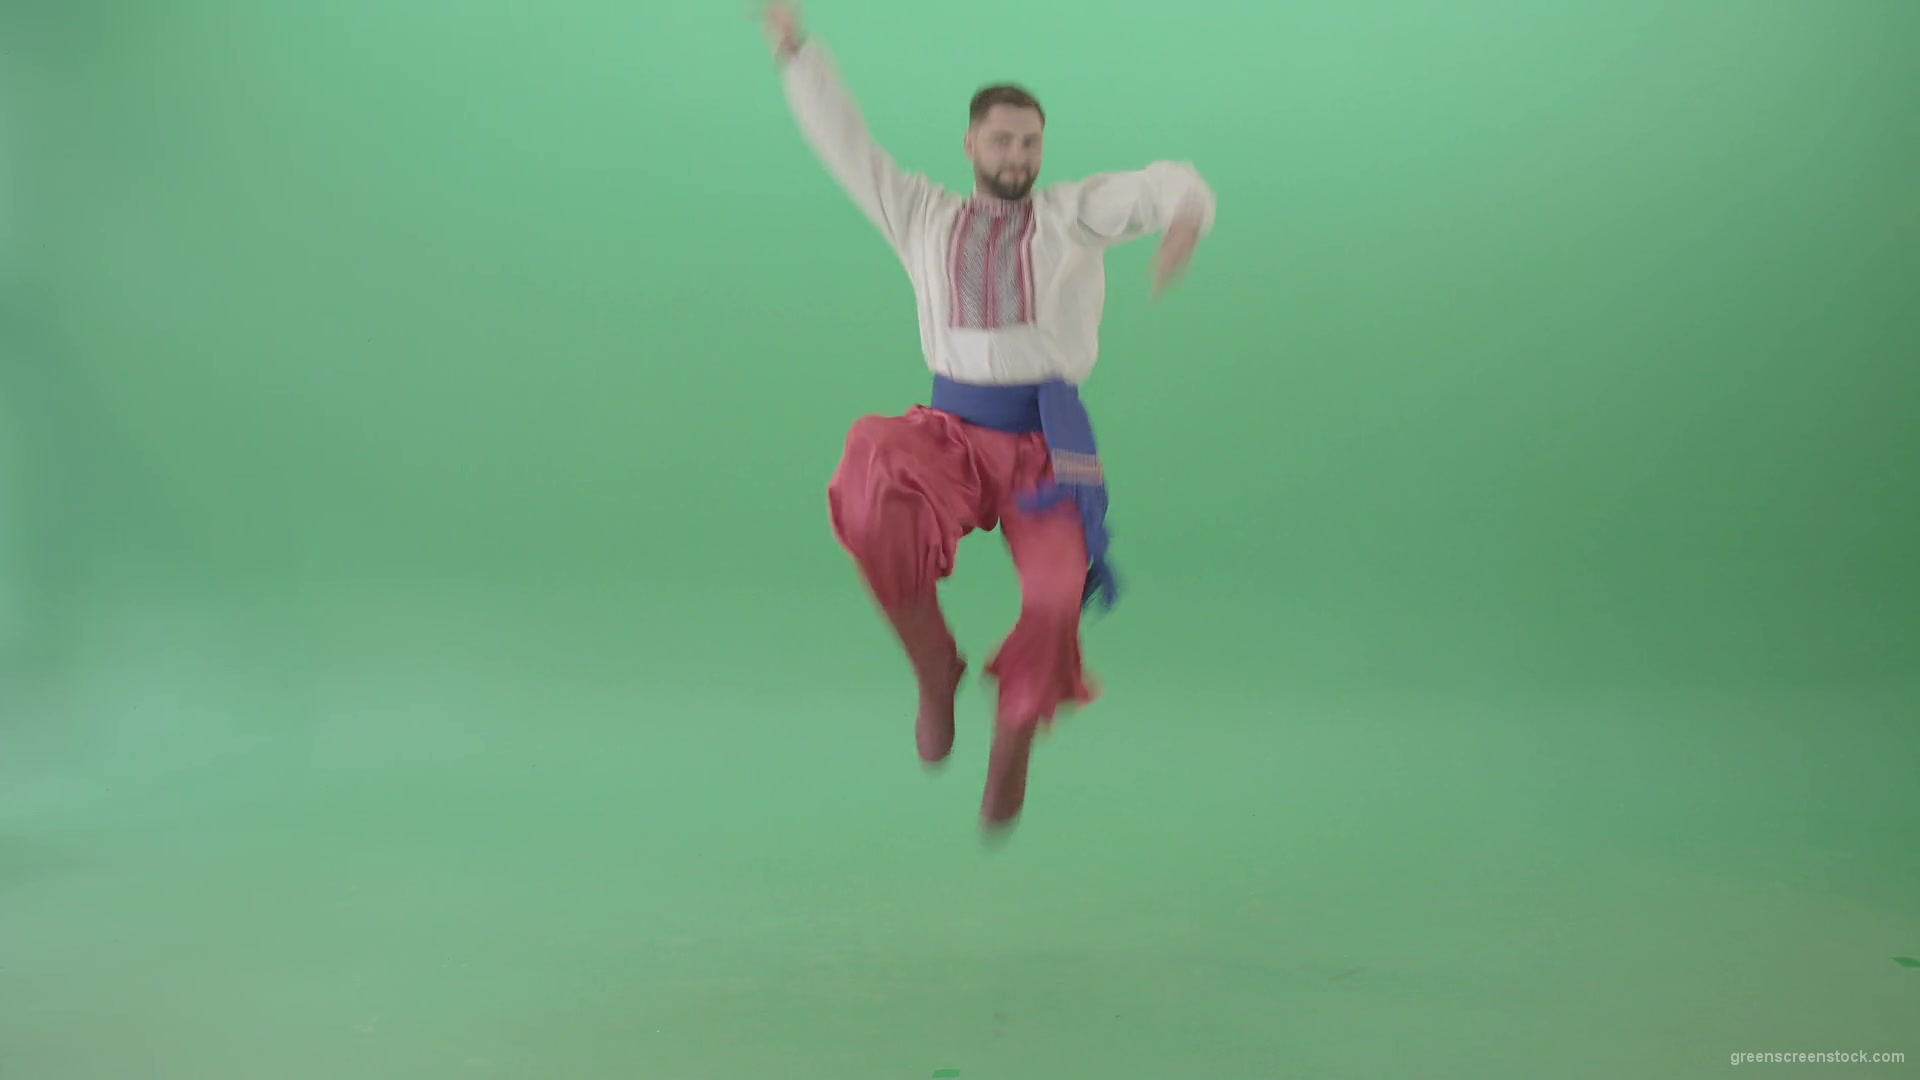 Slavic-Ukraine-folk-dance-by-UA-Cossack-man-jumping-isolated-on-Green-Background-4K-Video-Footage-1920_005 Green Screen Stock